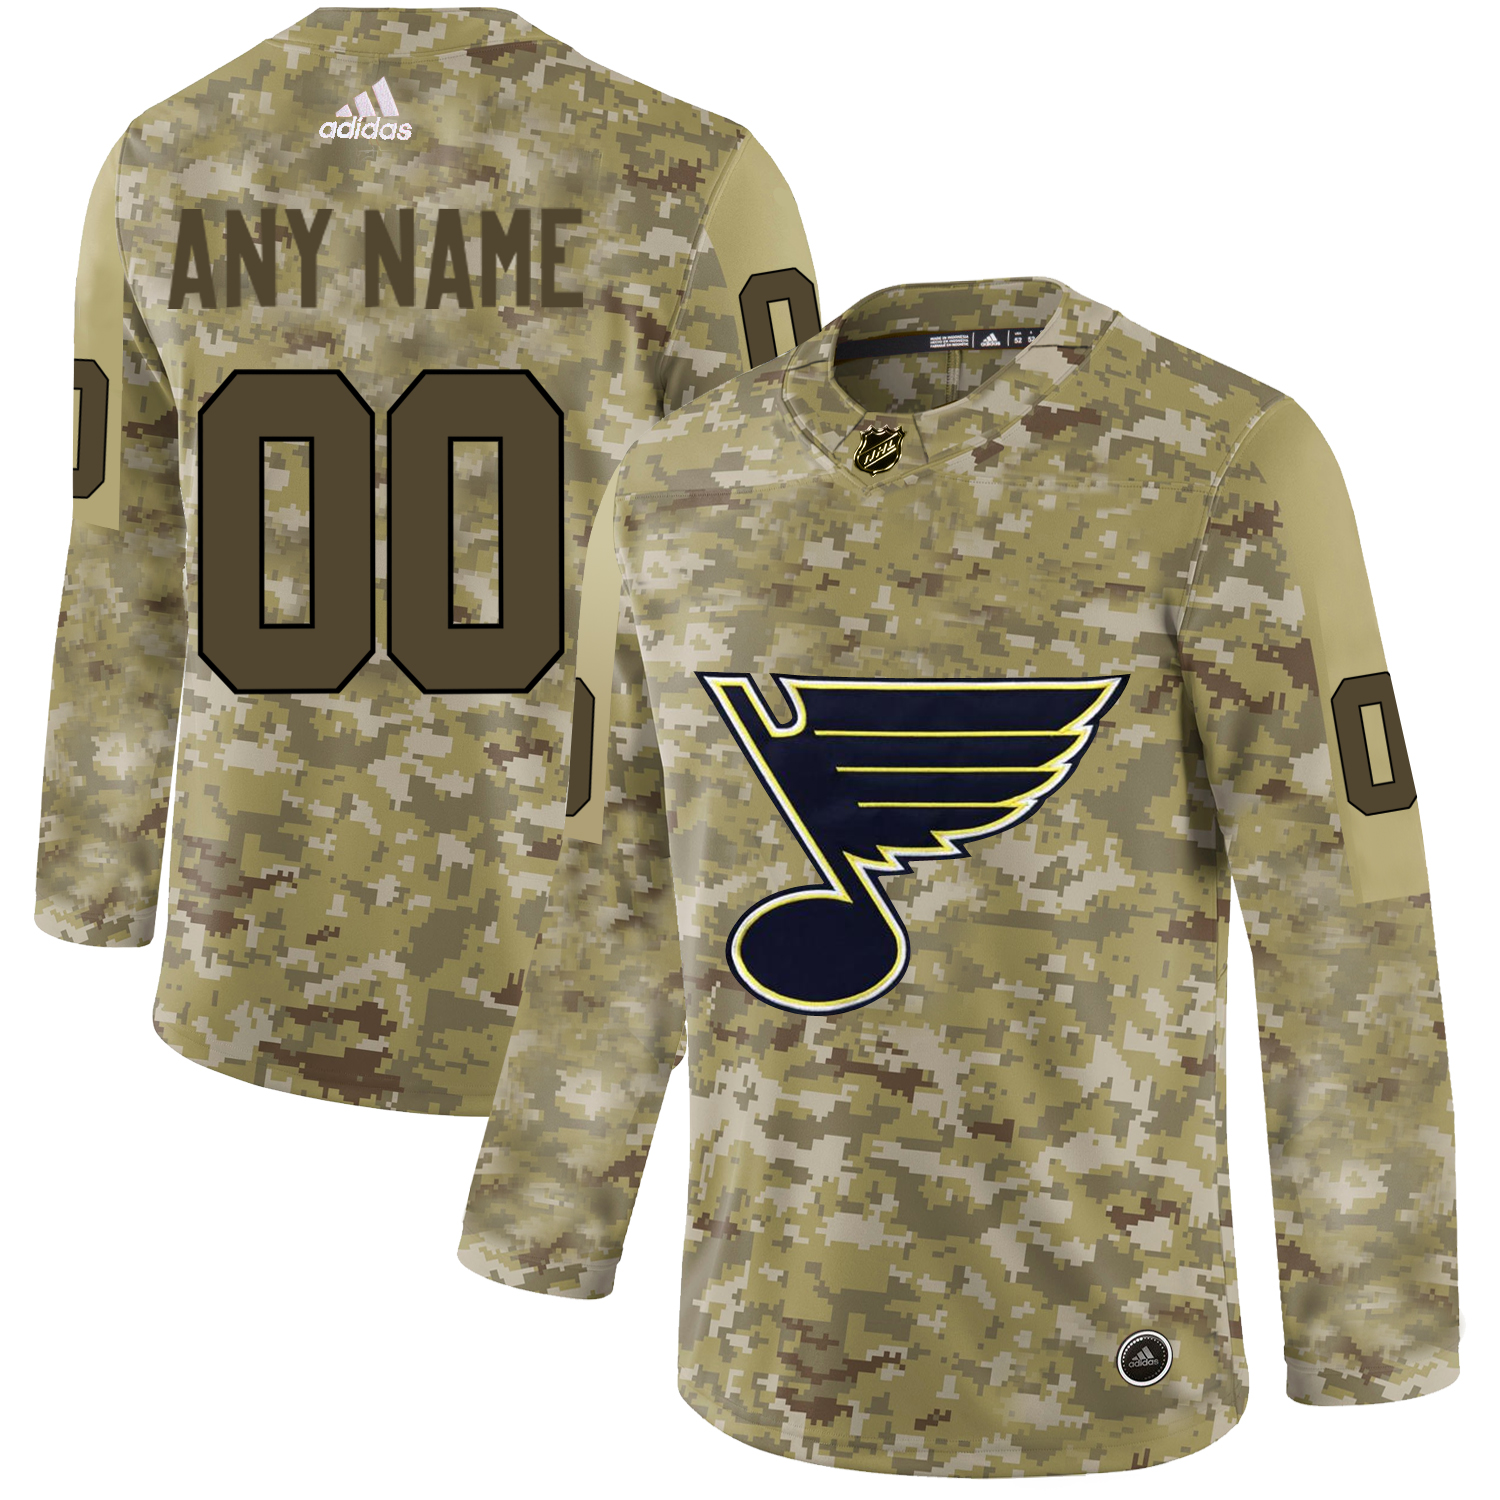 Men's Adidas Blues Personalized Camo Authentic NHL Jersey